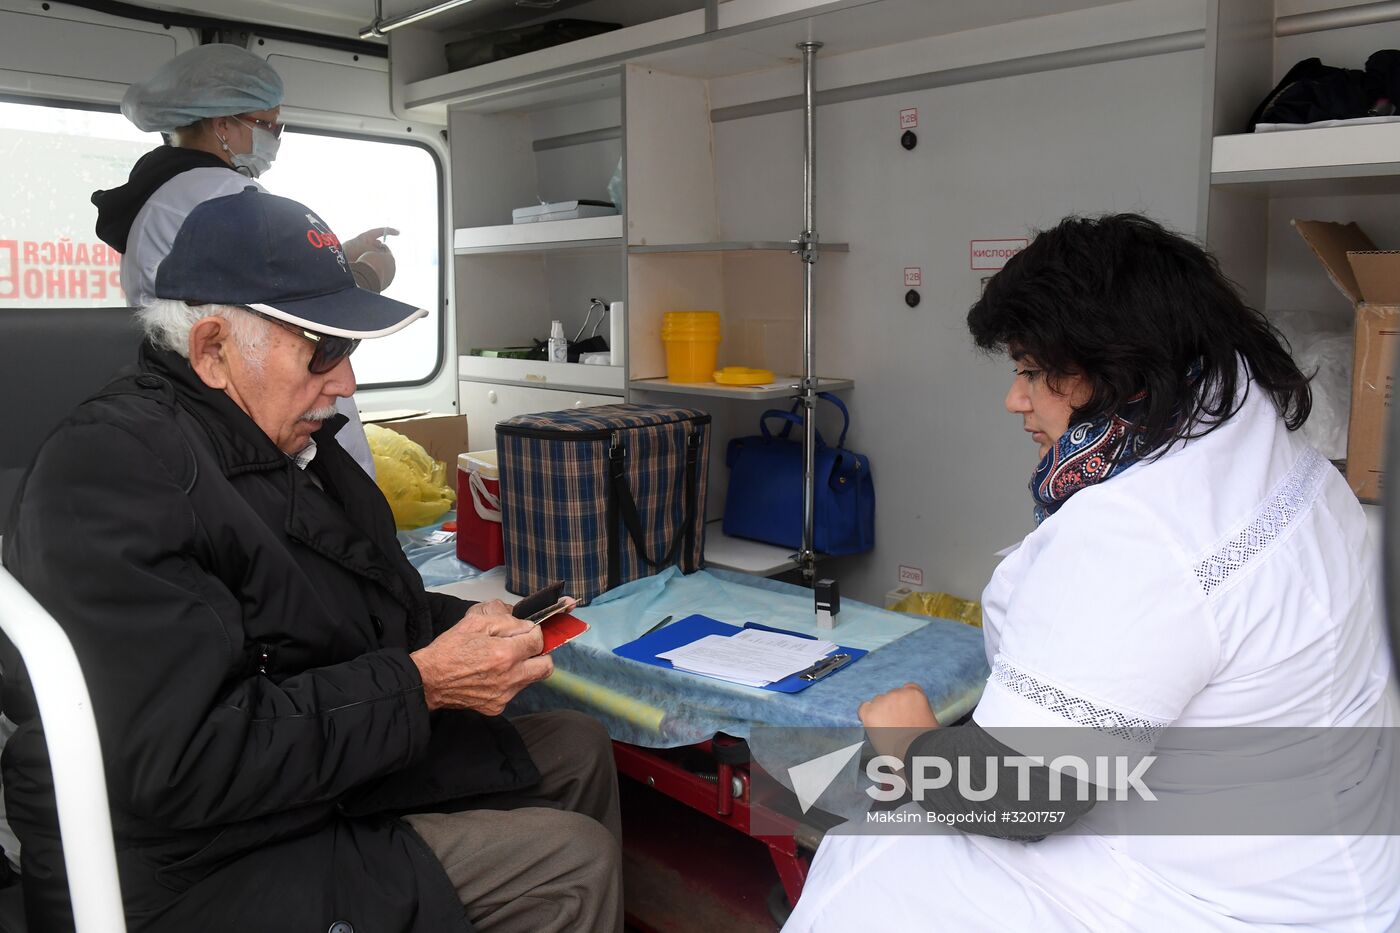 Mobile vaccination stations in Kazan